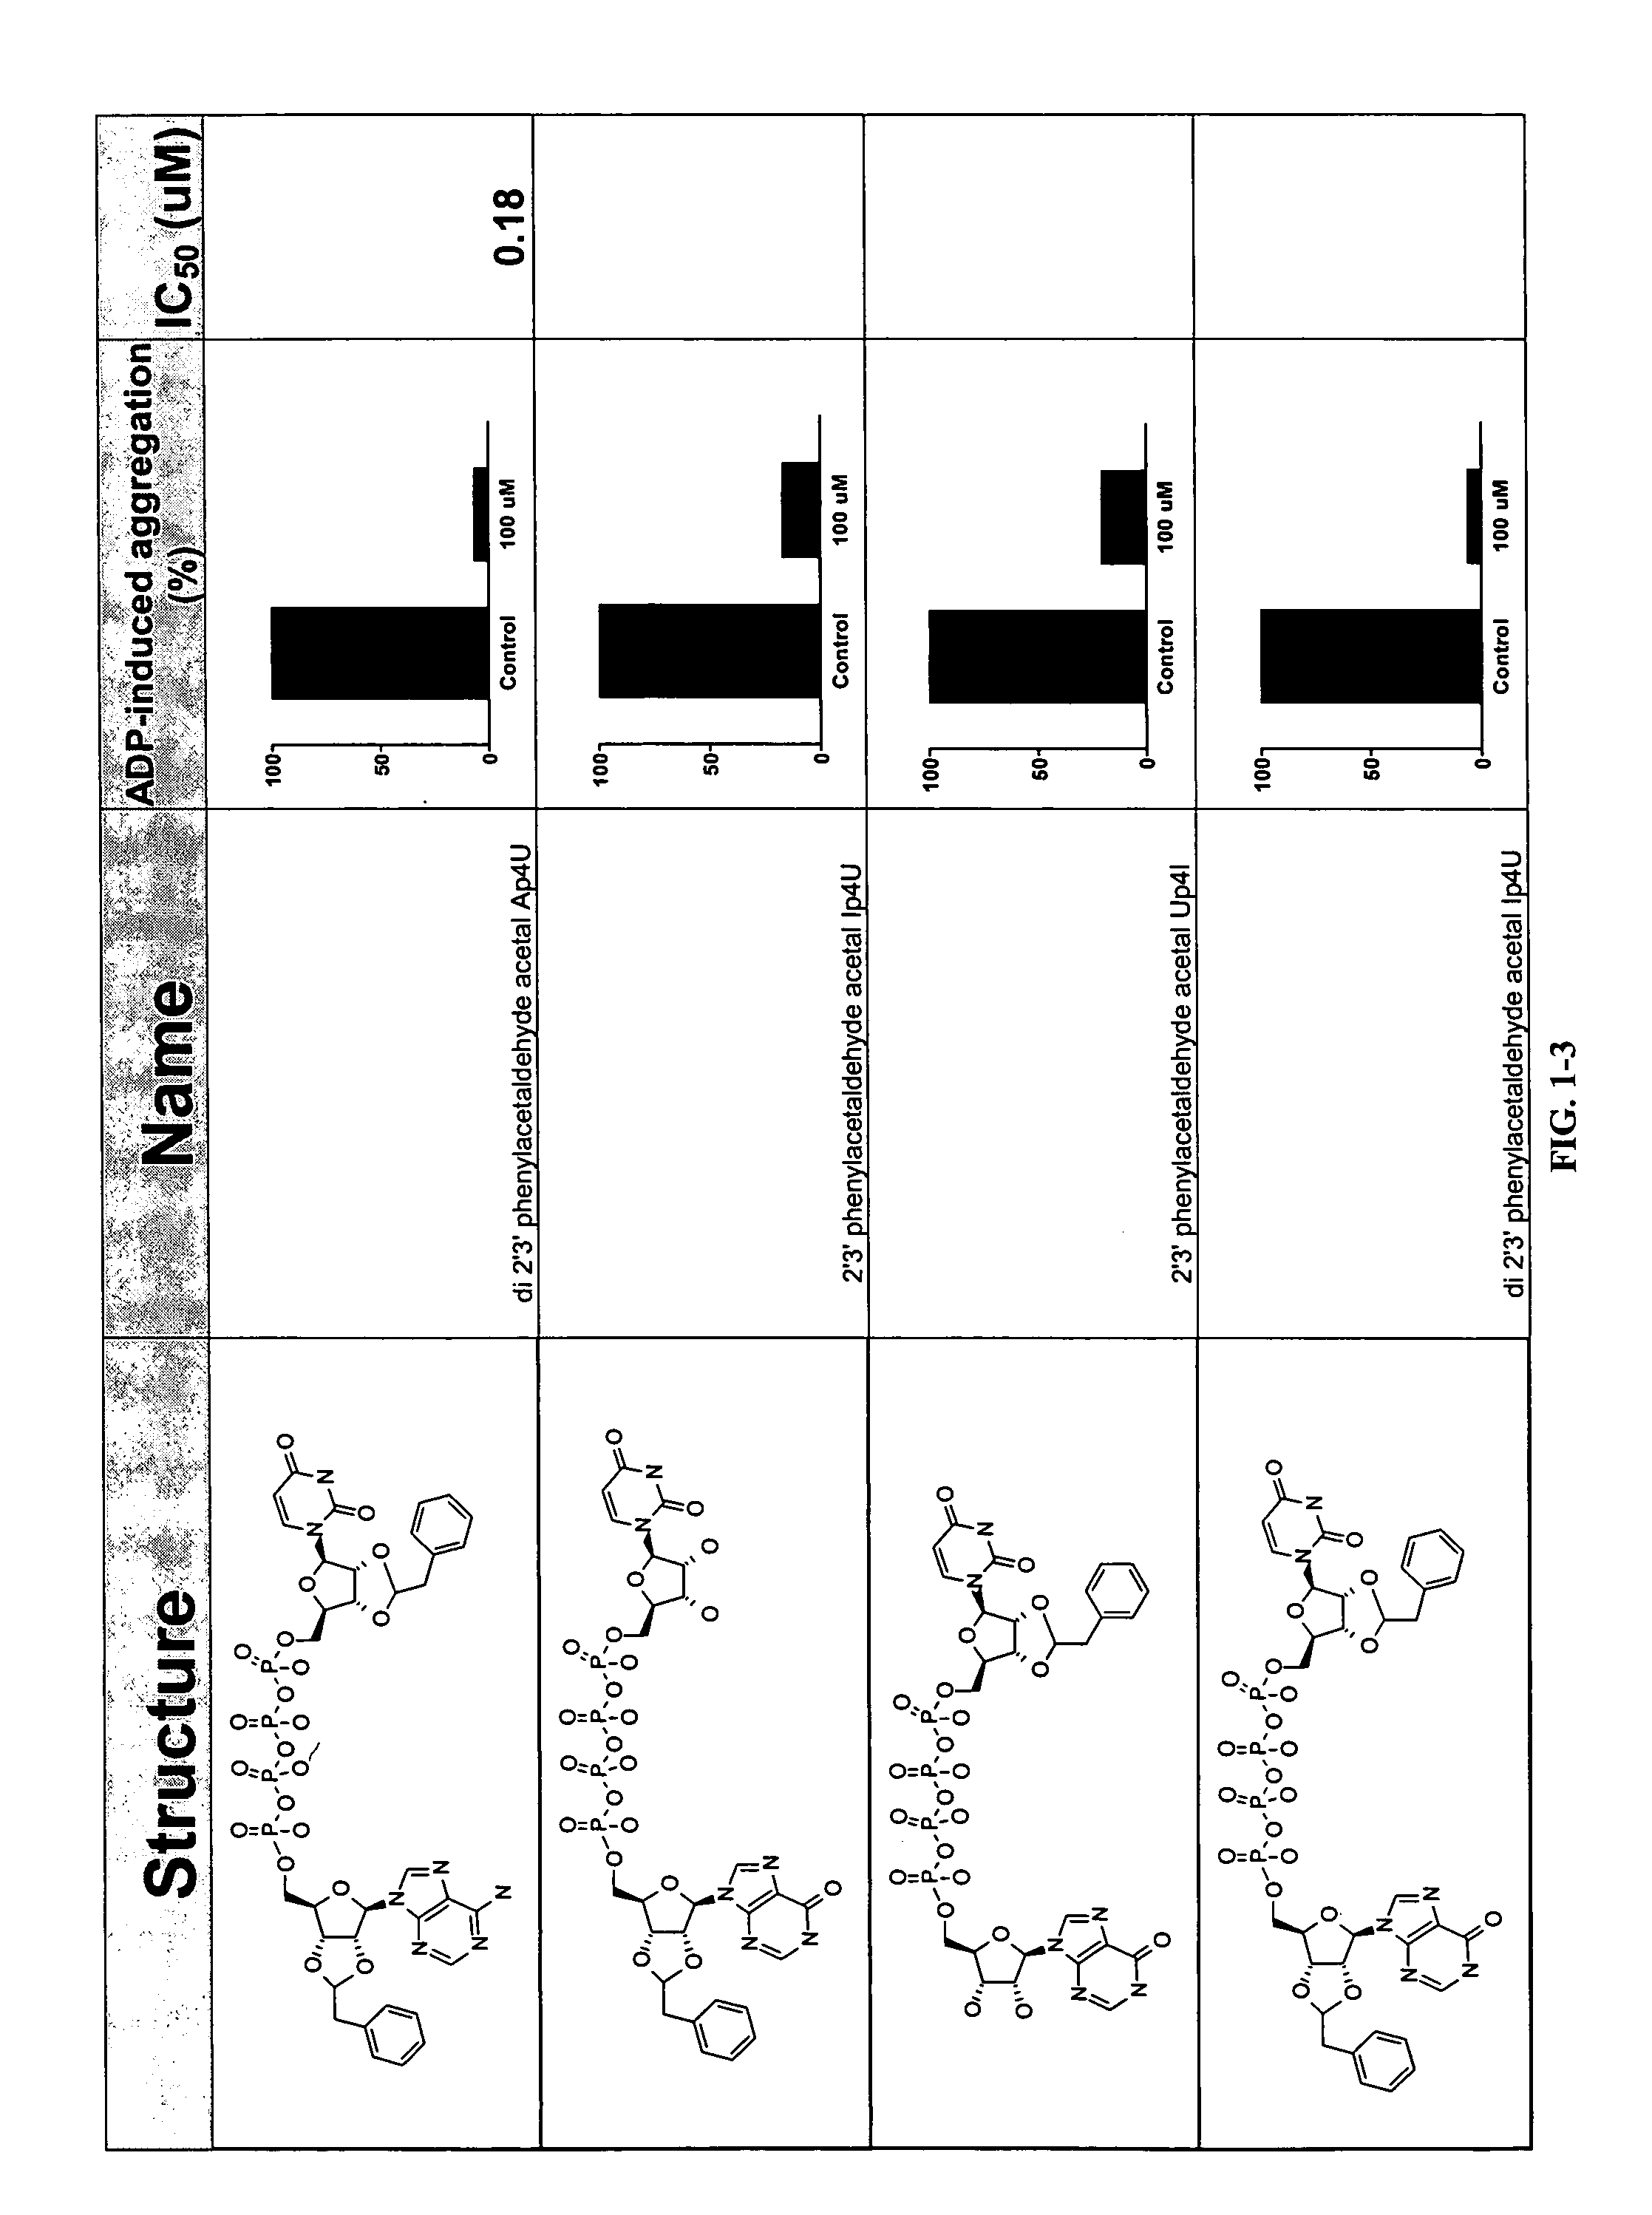 Composition and method for inhibiting platelet aggregation